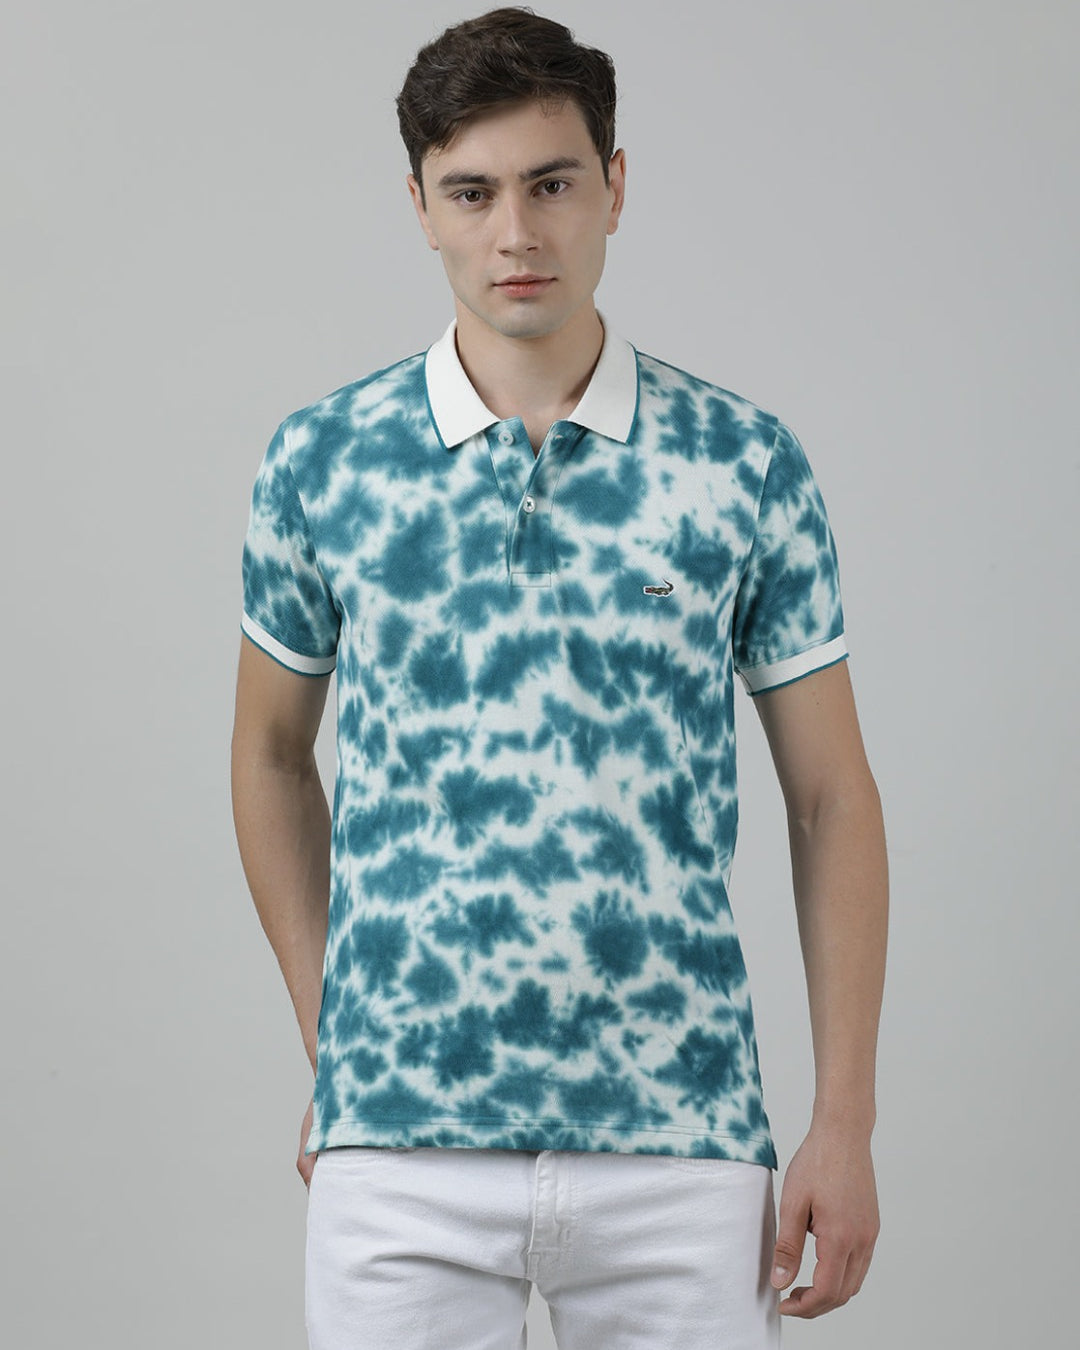 Casual Verdigris T-Shirt Tie and Dye Half Sleeve Slim Fit with Collar for Men